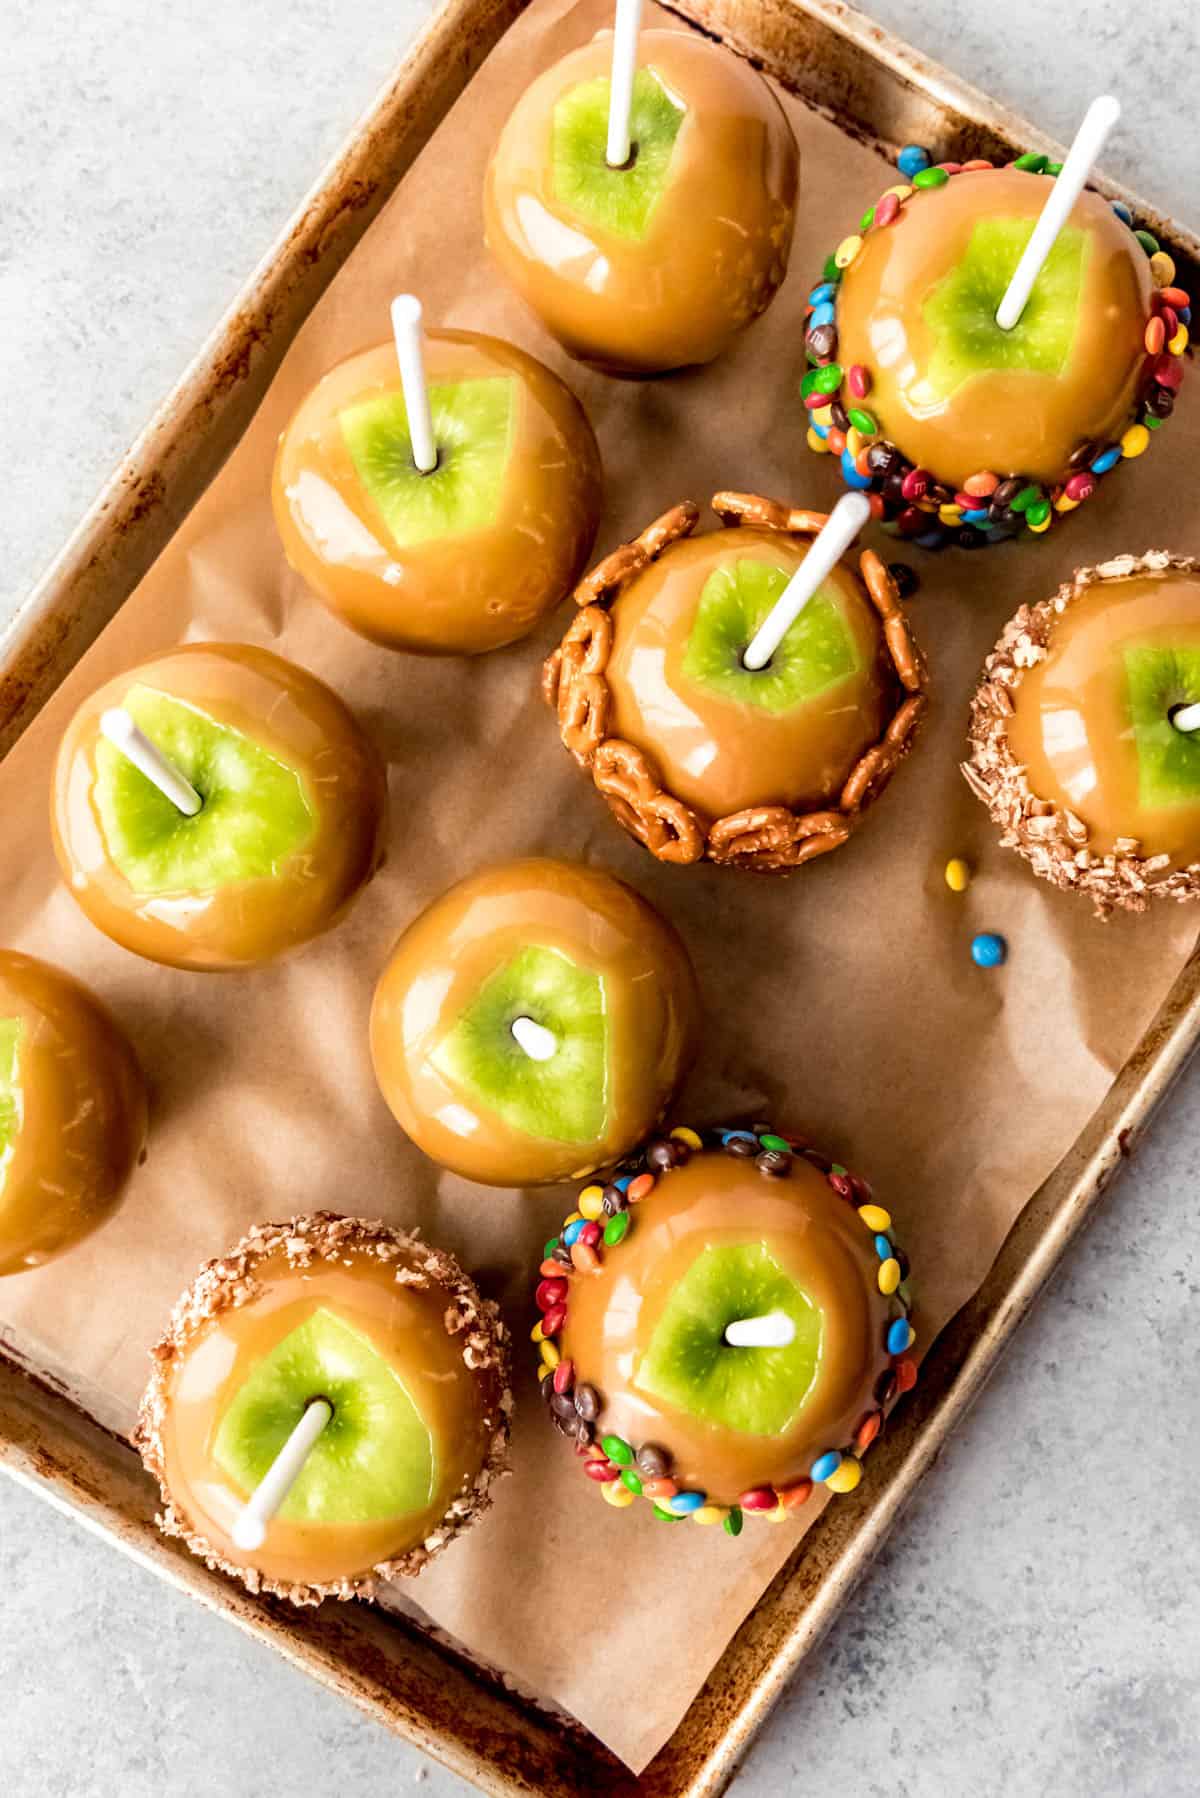 An image of granny smith apples covered in homemade caramel.